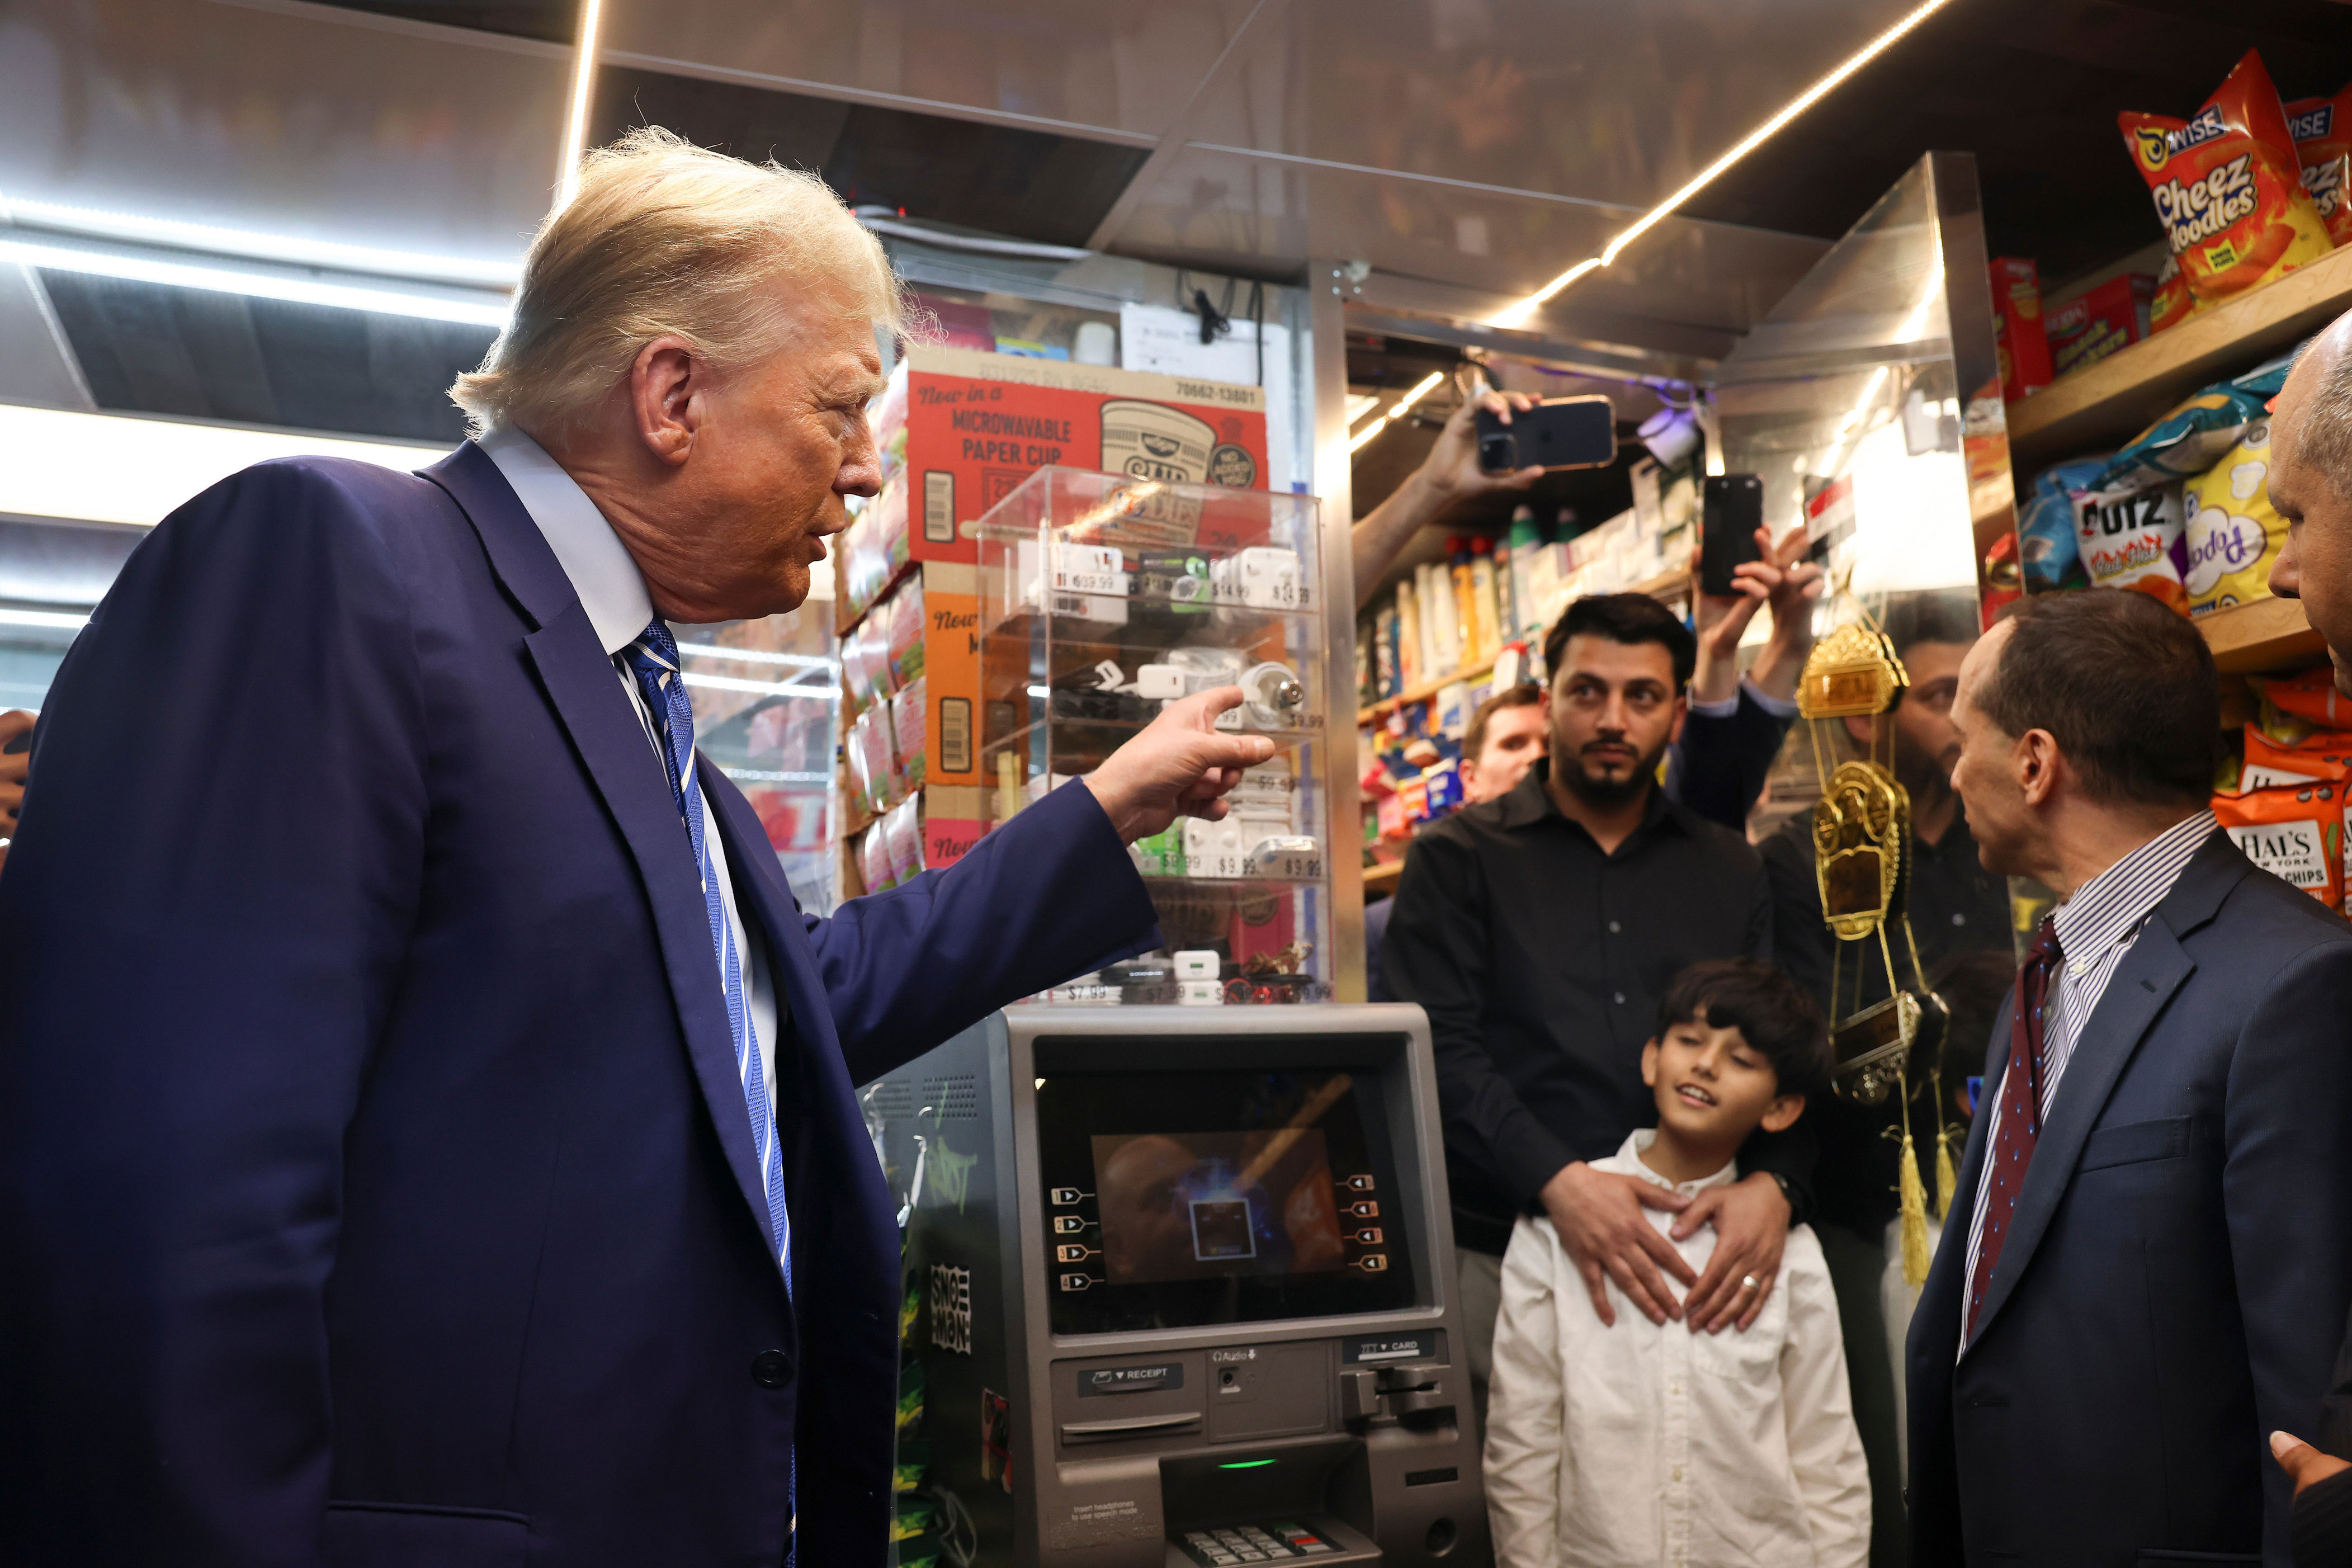 trump’s second day on criminal trial: bodega visit, judge warning and more bizarre jury excuses